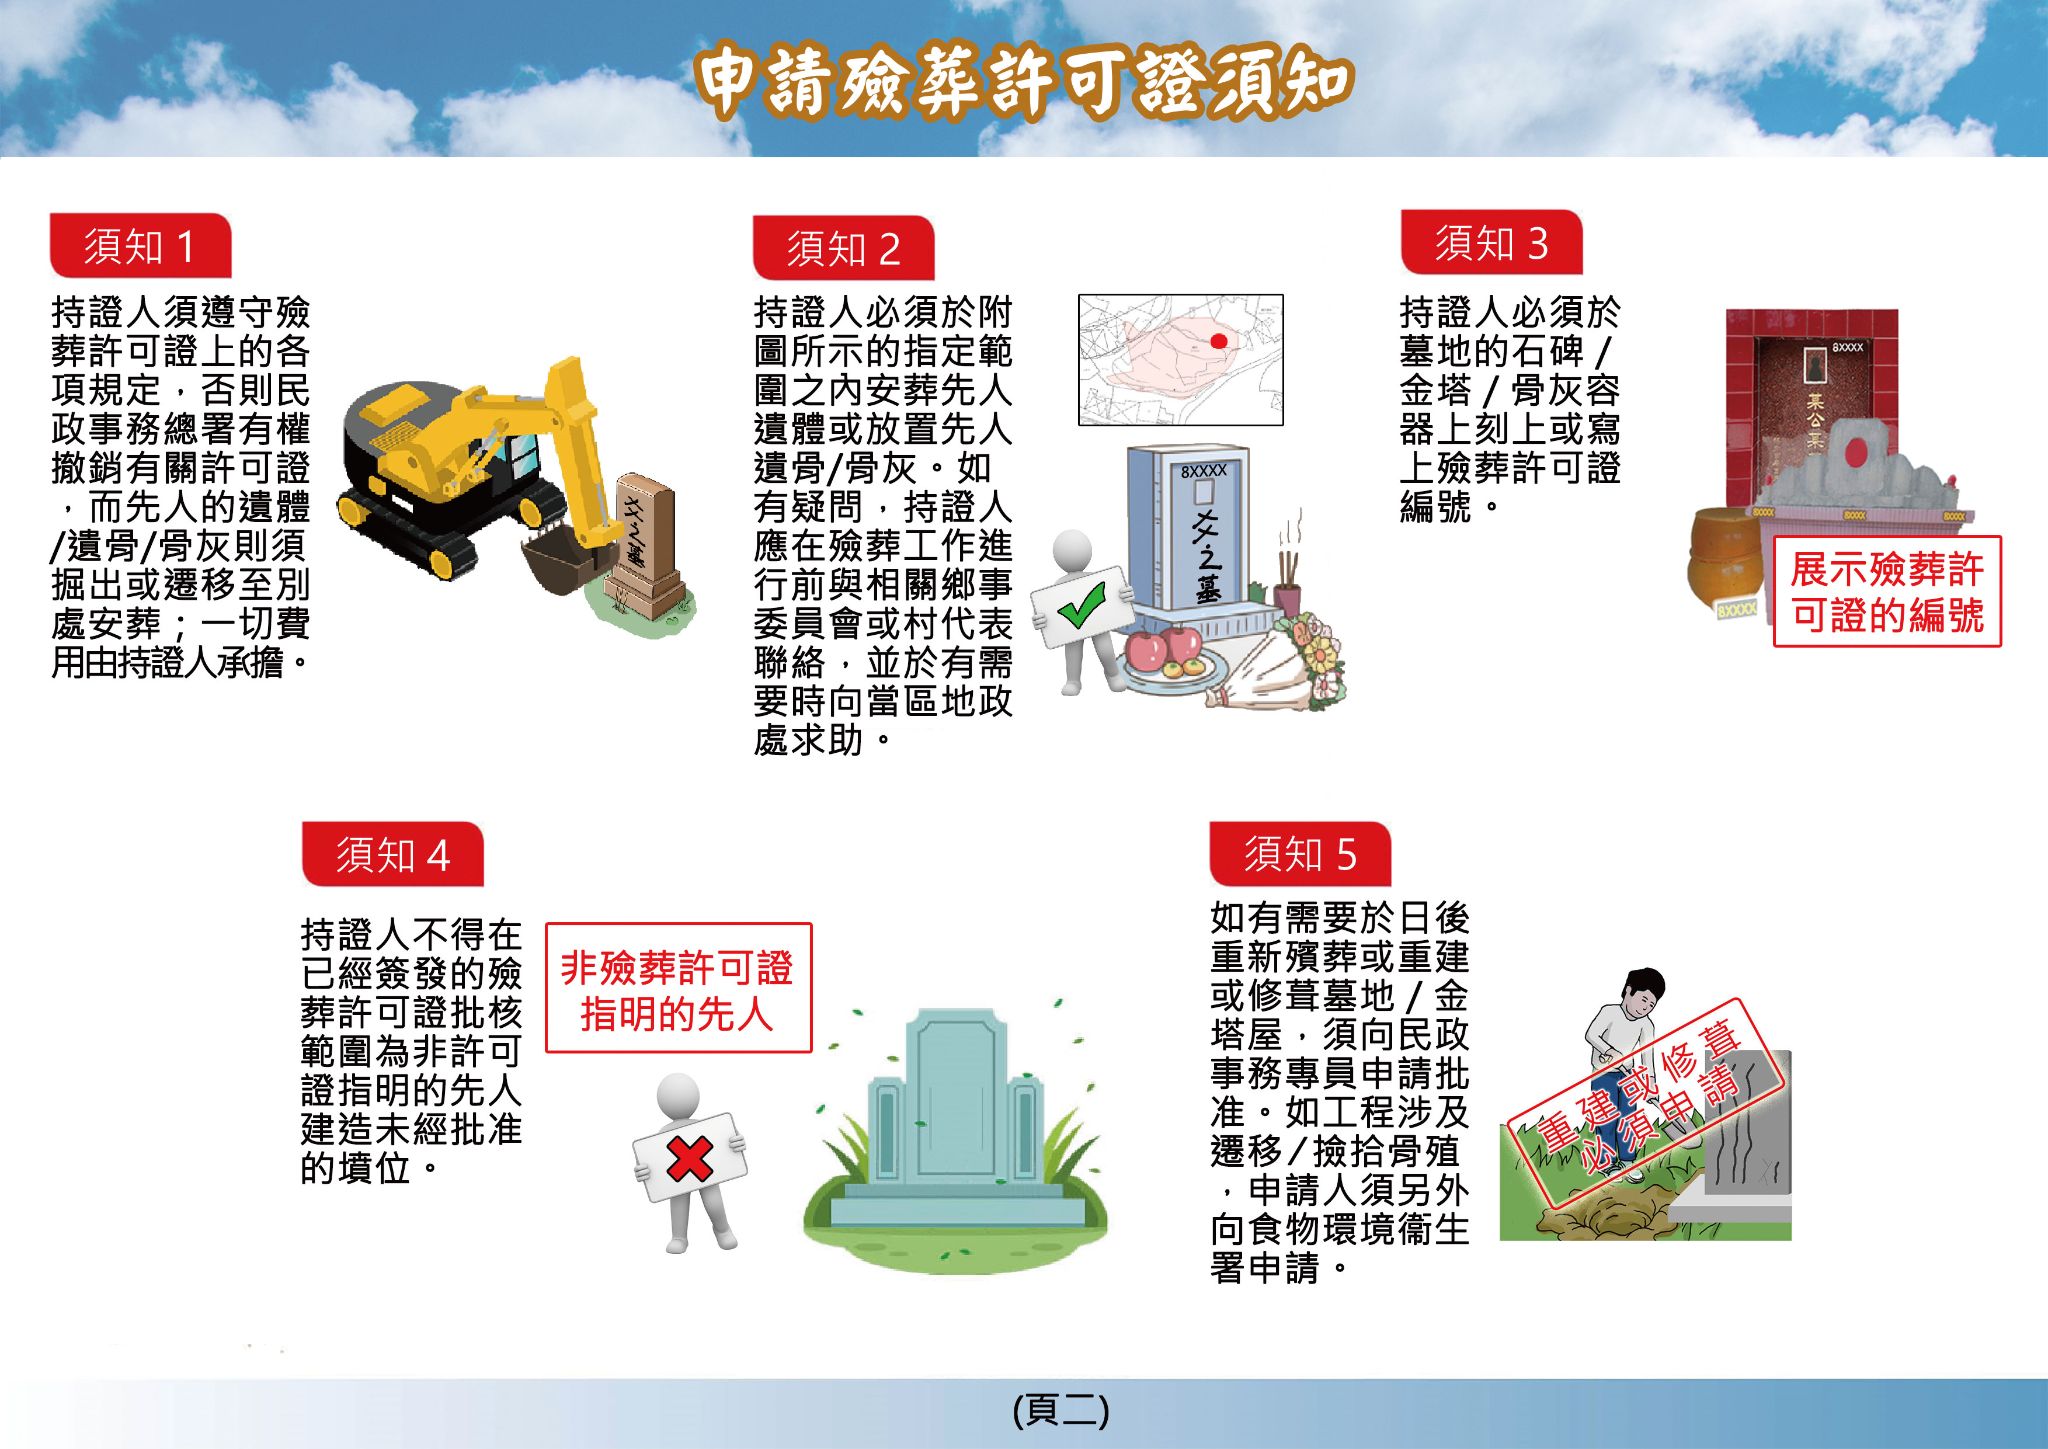 Procedure for Application for Certificate for Burial and Points to Note (Chinese Only)